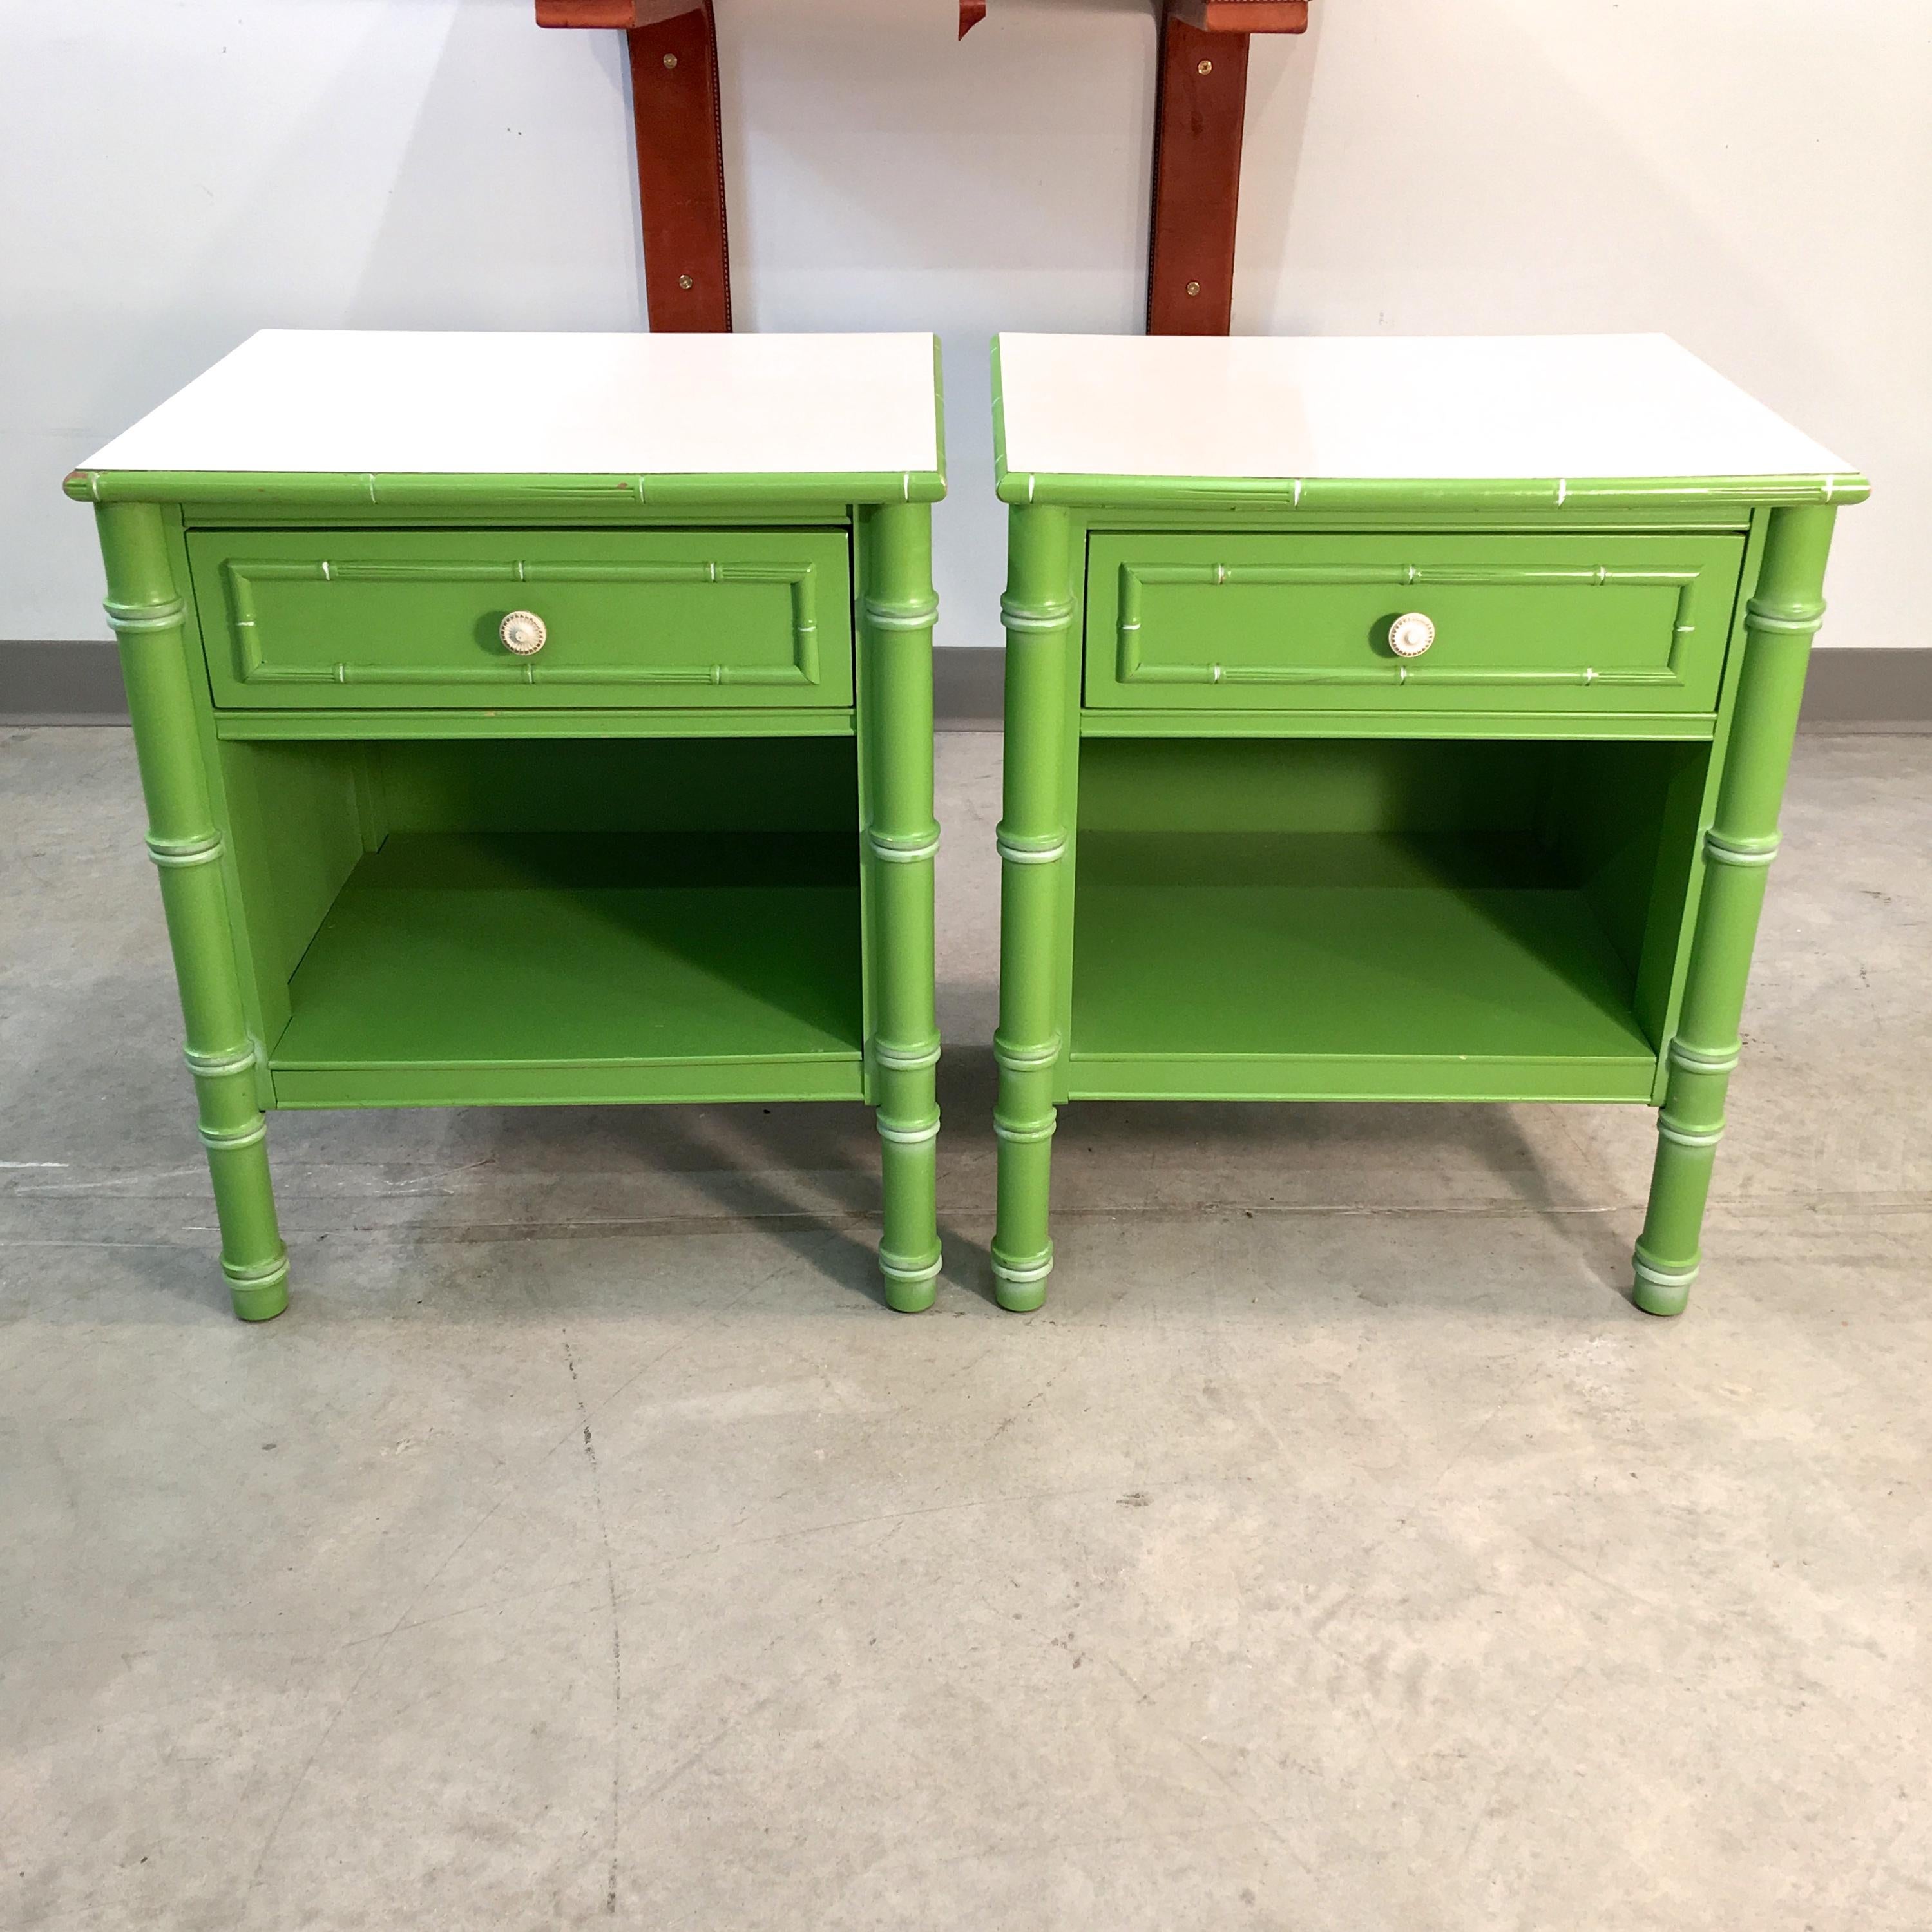 Pair of 1960s Thomasville Allegro faux bamboo nightstands in their original preppy pistachio green with striated white Formica tops. Each has a single drawer and an open storage space. They're closed off on the back.